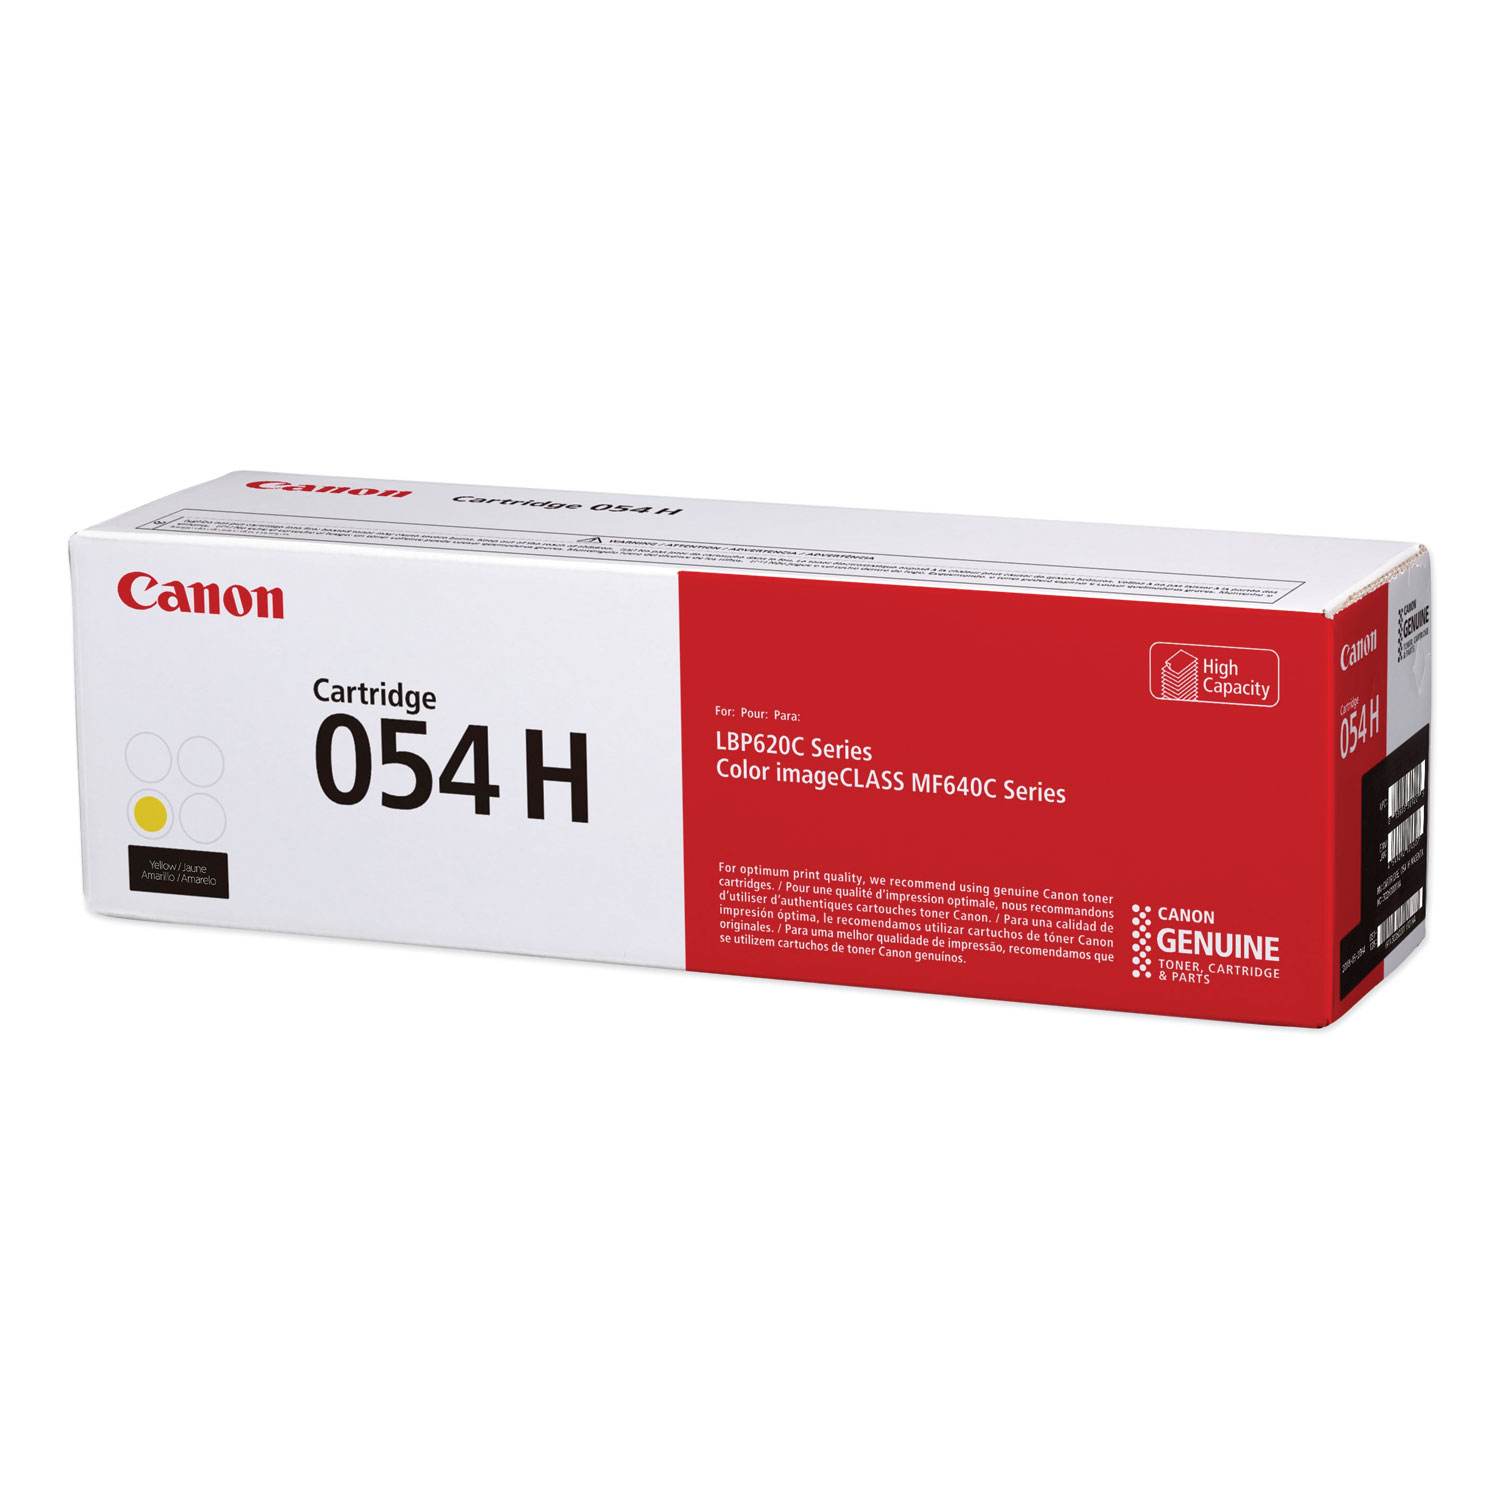  Canon 3025C001 3025C001 (054H) High-Yield Toner, 2,300 Page-Yield, Yellow (CNM3025C001) 